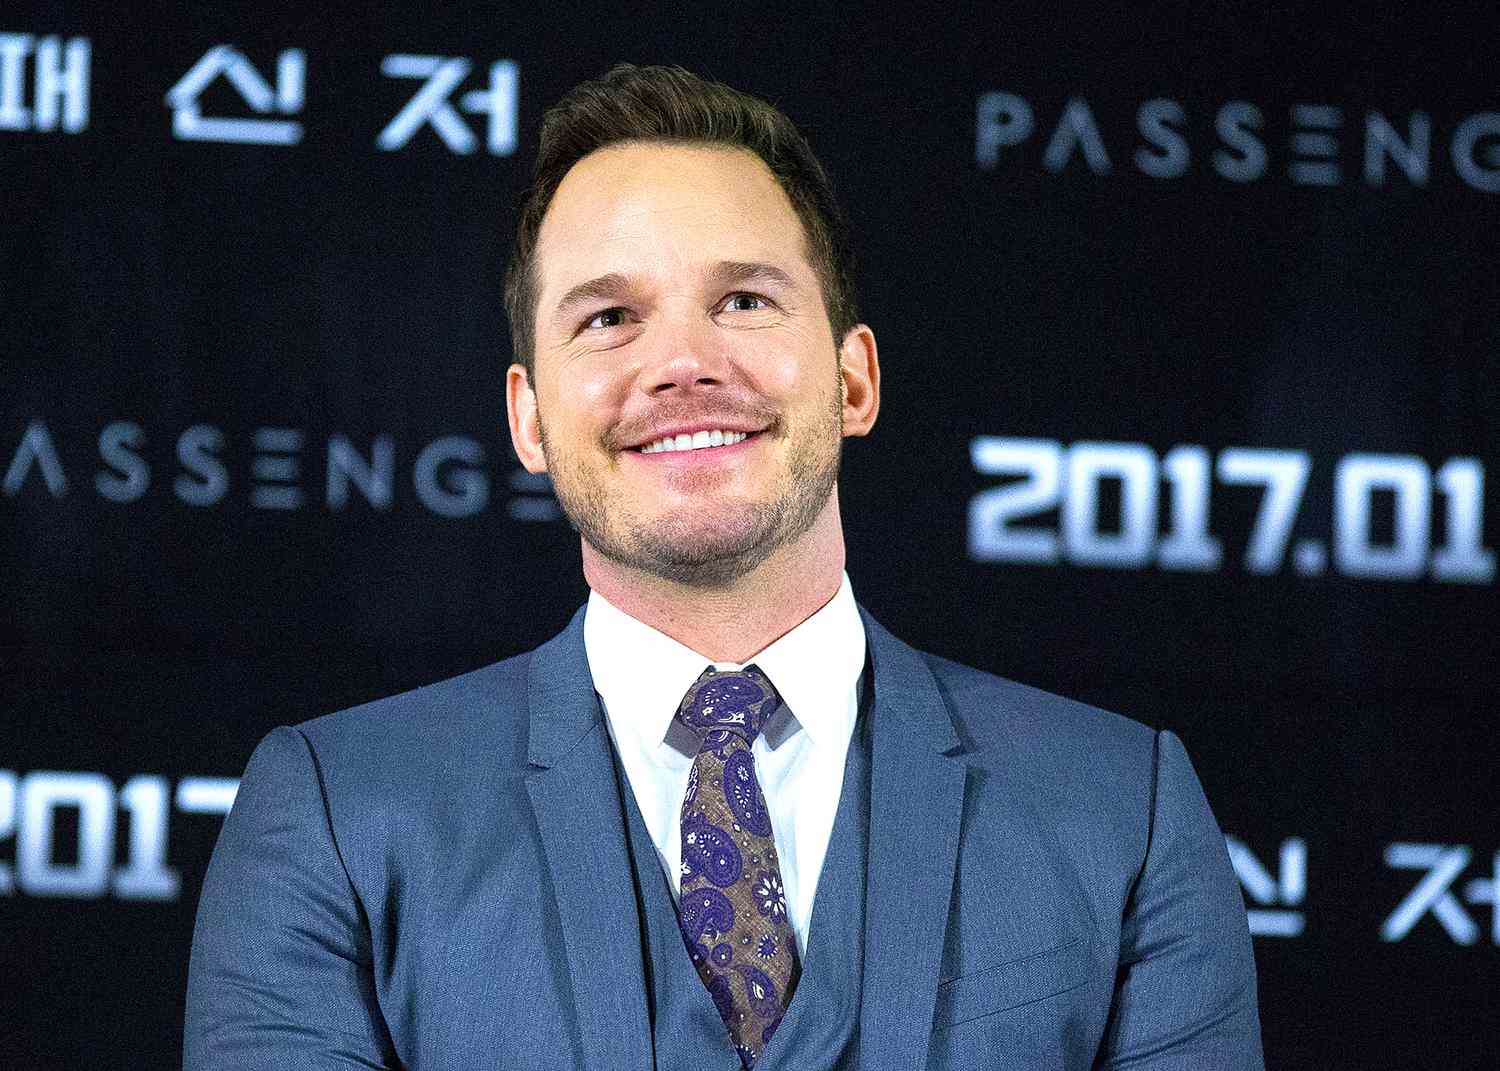 SEOUL, SOUTH KOREA - DECEMBER 16: Actor Chris Pratt attends the press conference for "Passengers" at CGV on December 16, 2016 in Seoul, South Korea. The film will open on January 05, 2017 in South Korea. (Photo by Han Myung-Gu/WireImage)